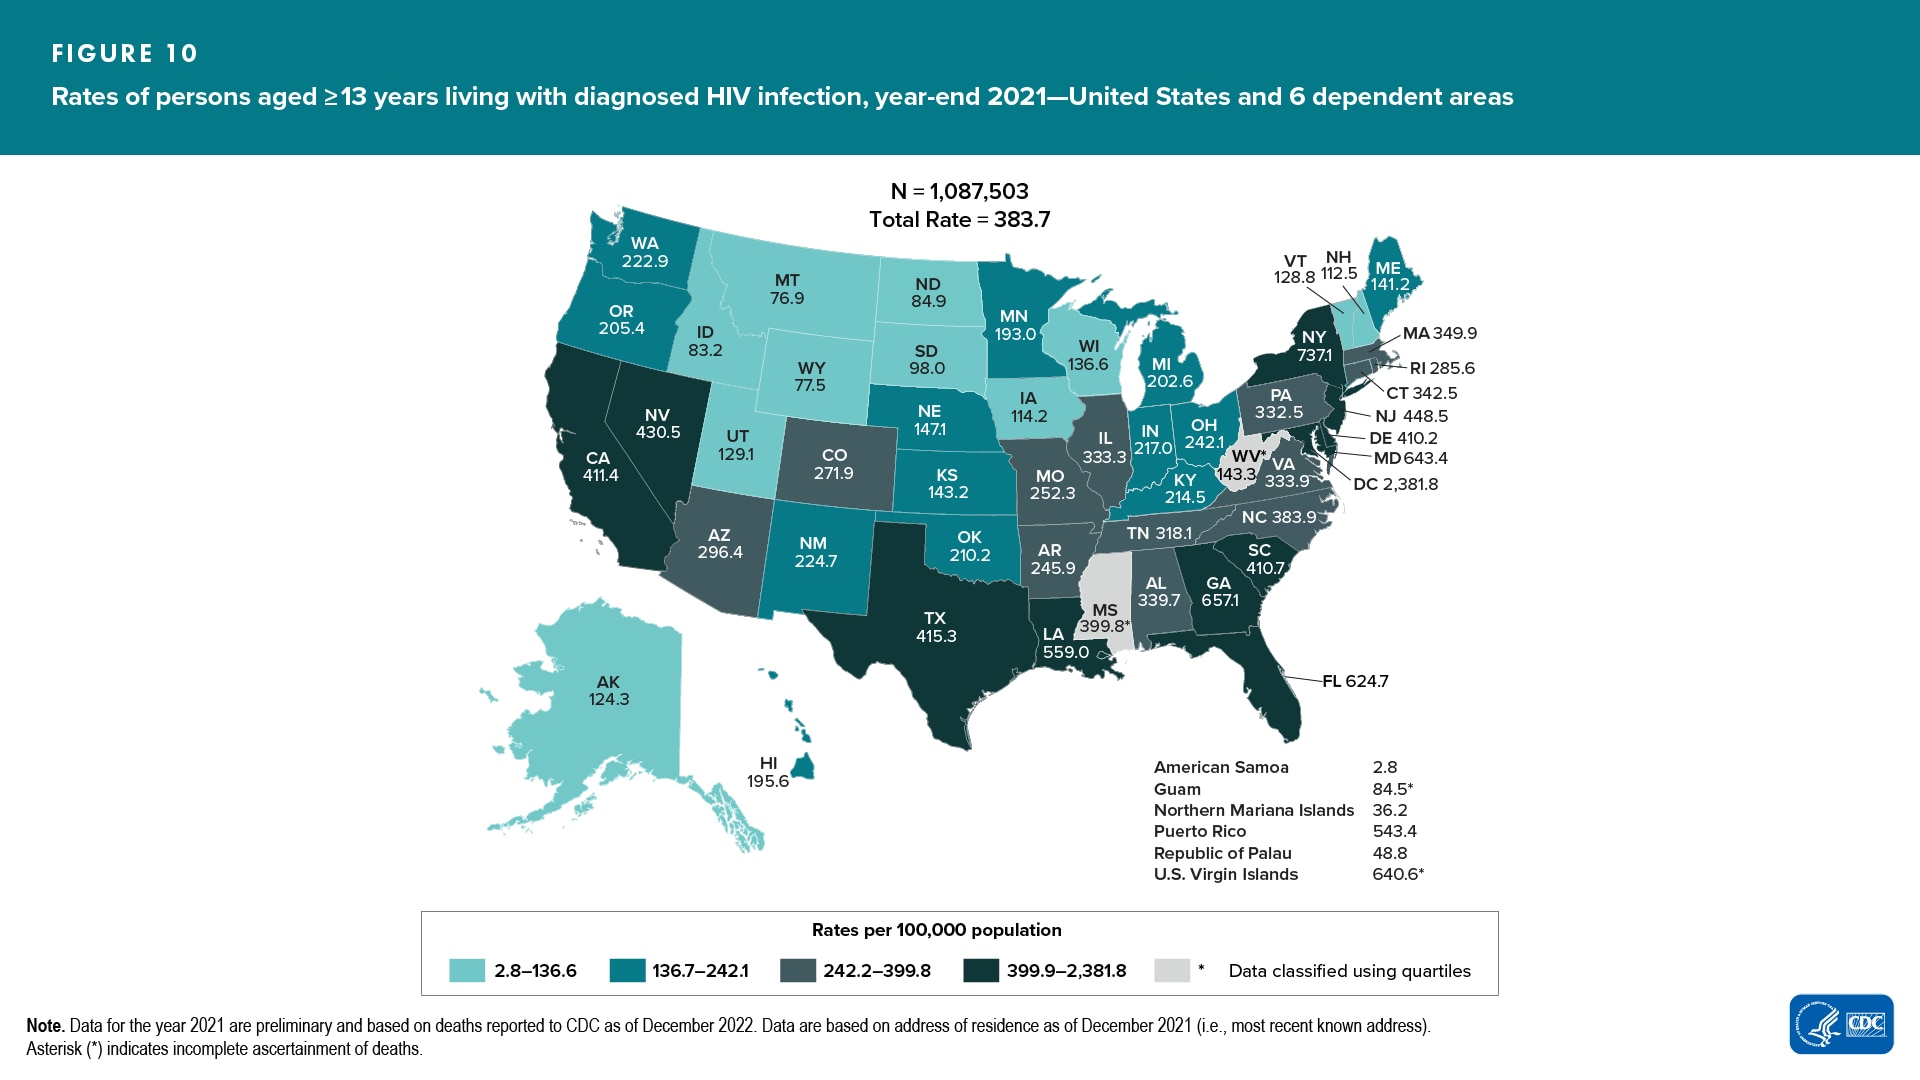 At year-end 2021 in the United States and 6 dependent areas, 1,087,503 persons aged≥13 years (rate: 383.7) were living with diagnosed HIV infection.